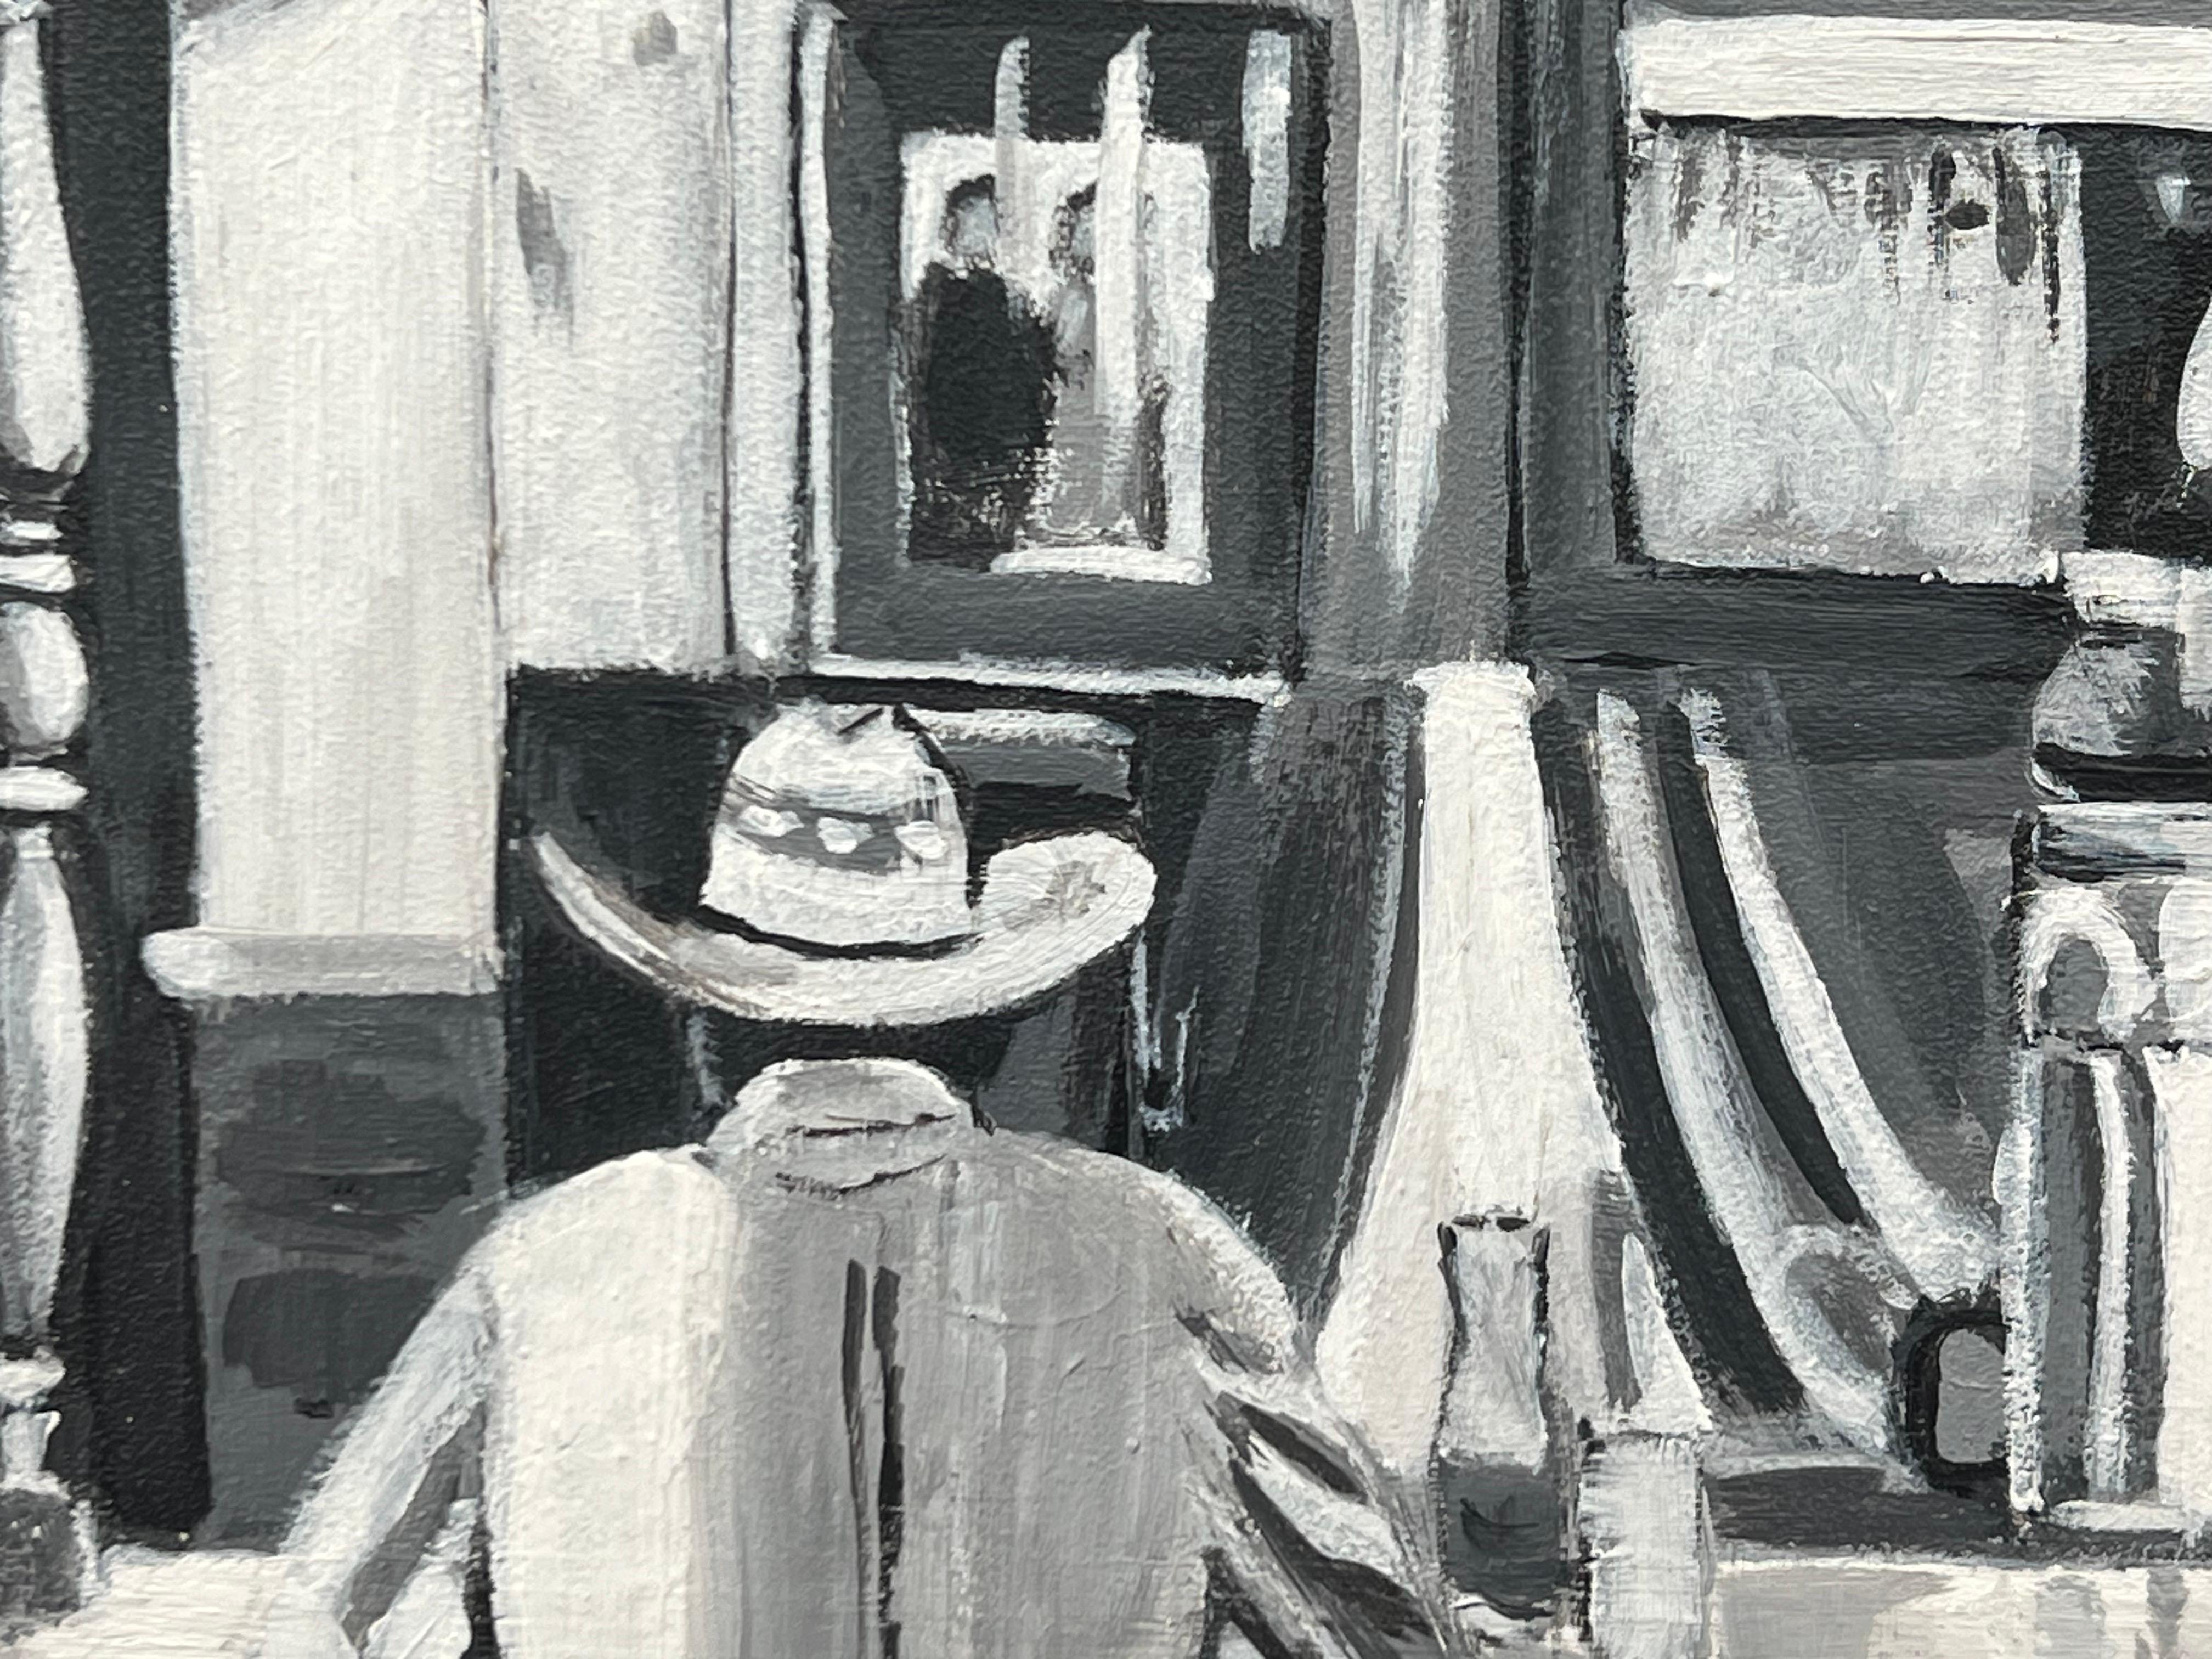 American Cowboy Diner Painting by British Contemporary Artist in Black & White 9